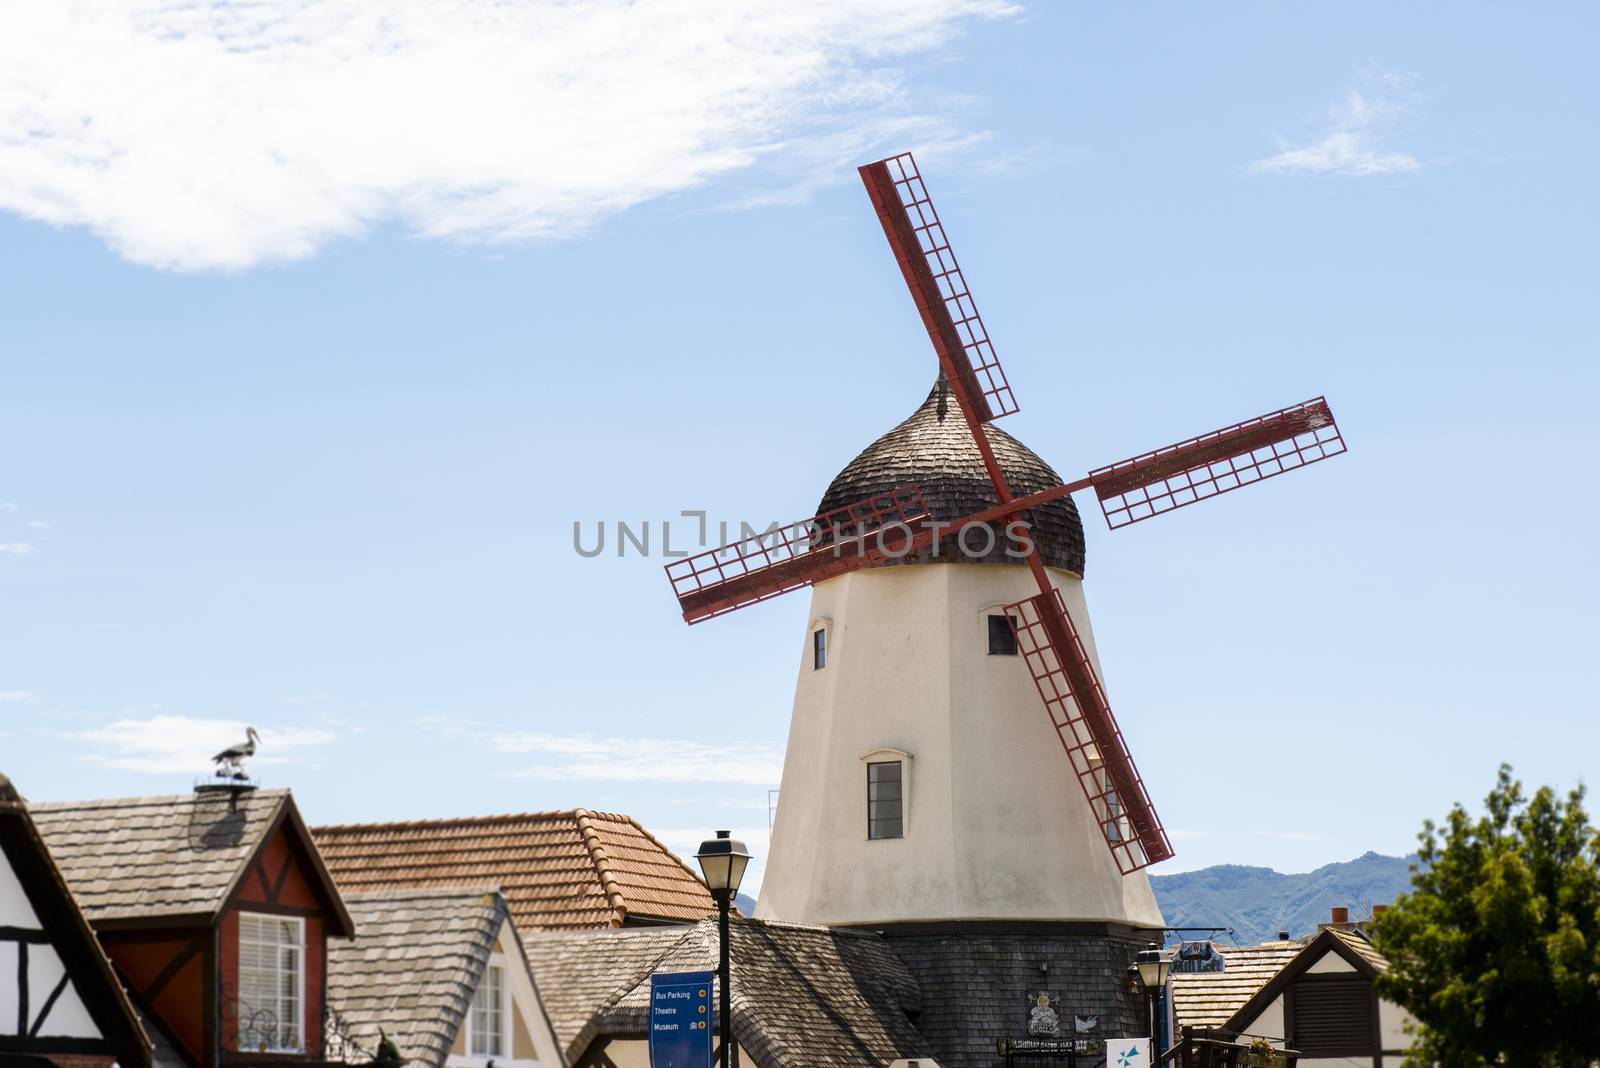 Windmill in Solvang, CA by Njean